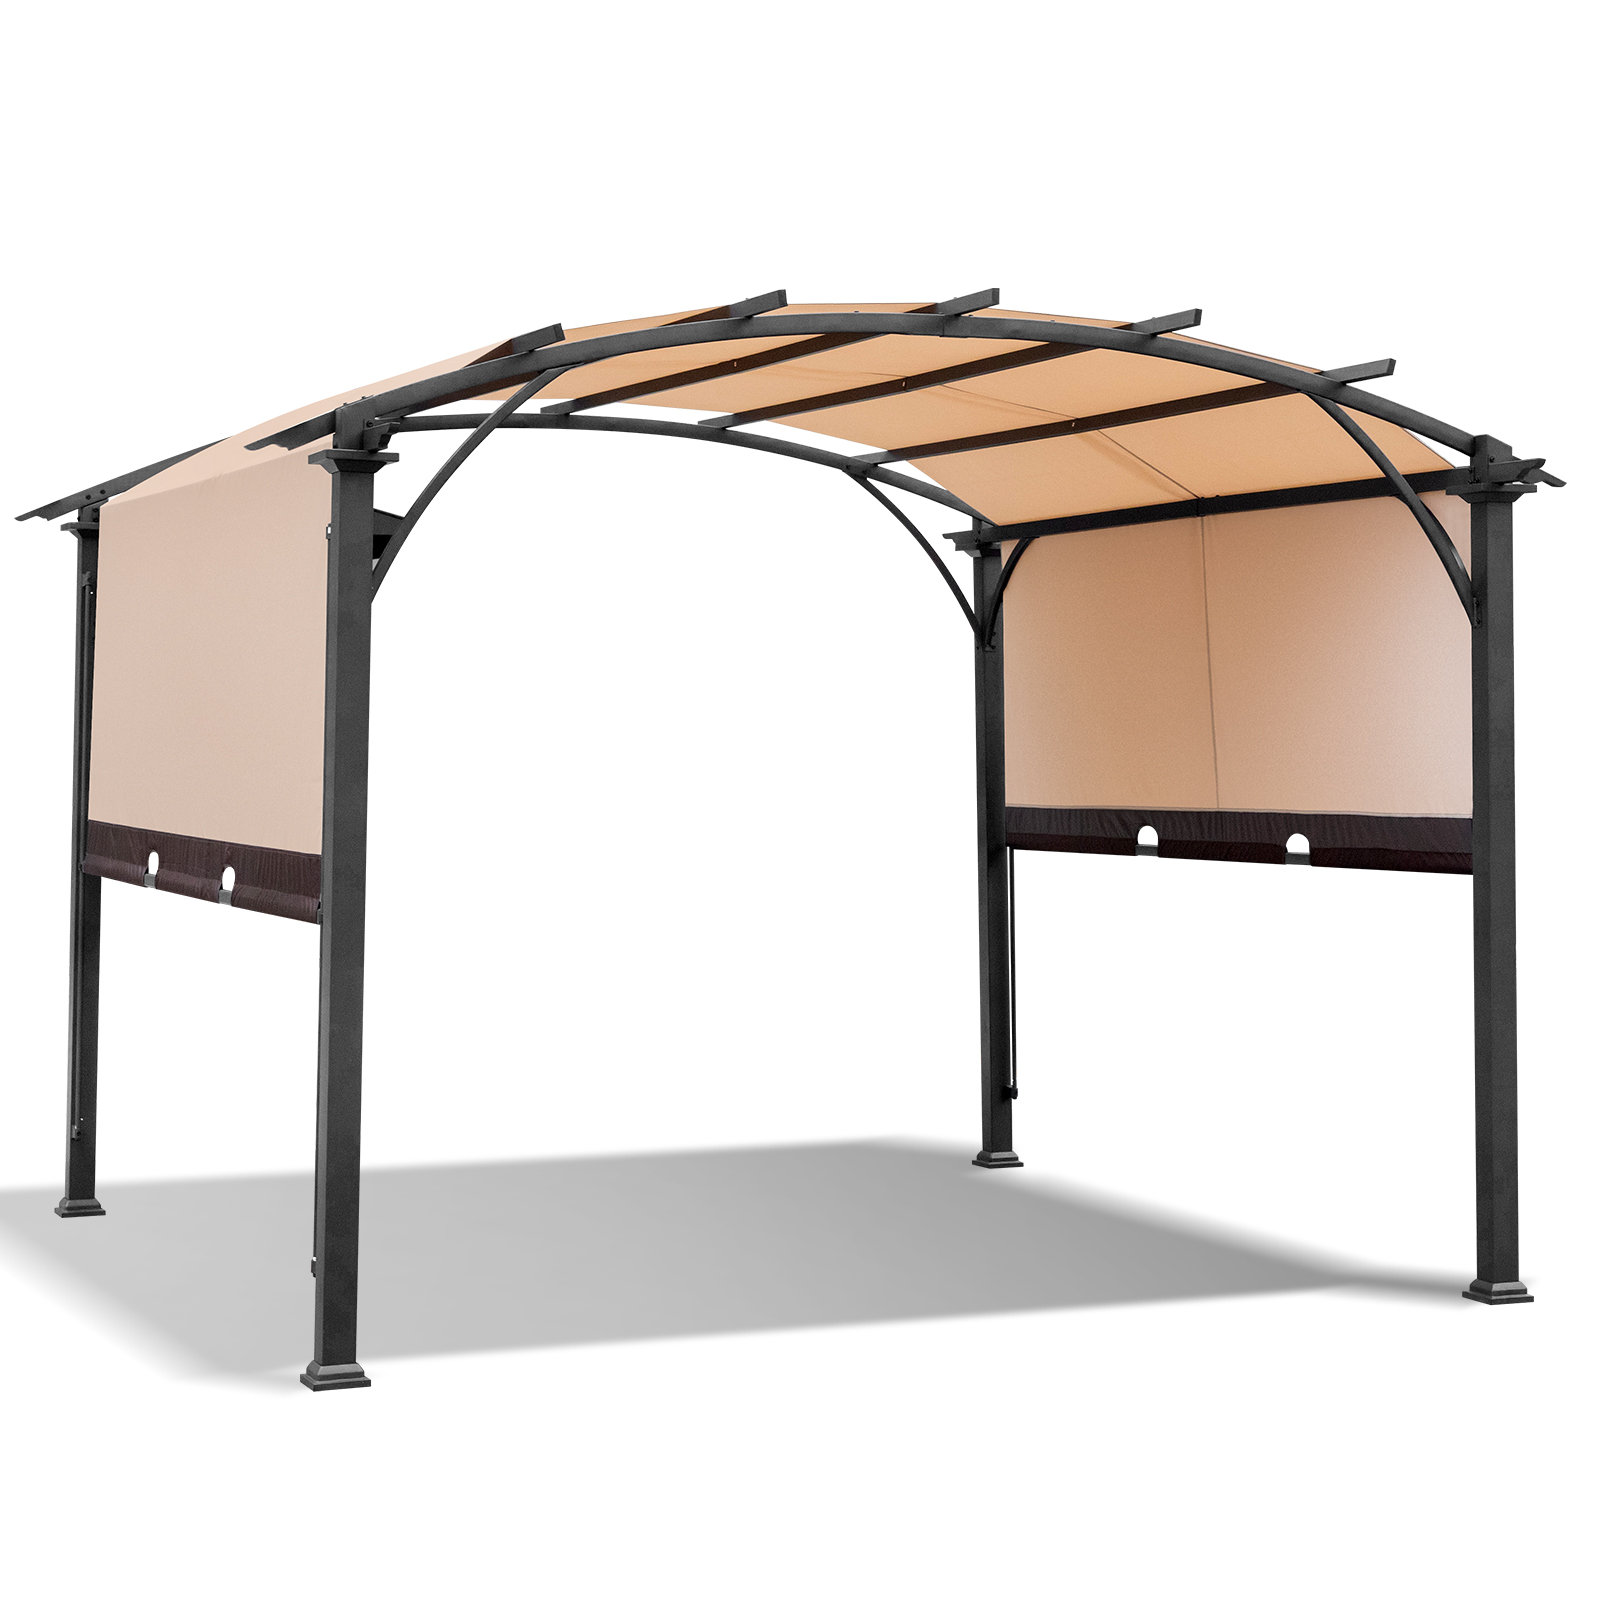 Outopee 11 Ft W X 11 Ft D Metal Pergola With Canopy Wayfair